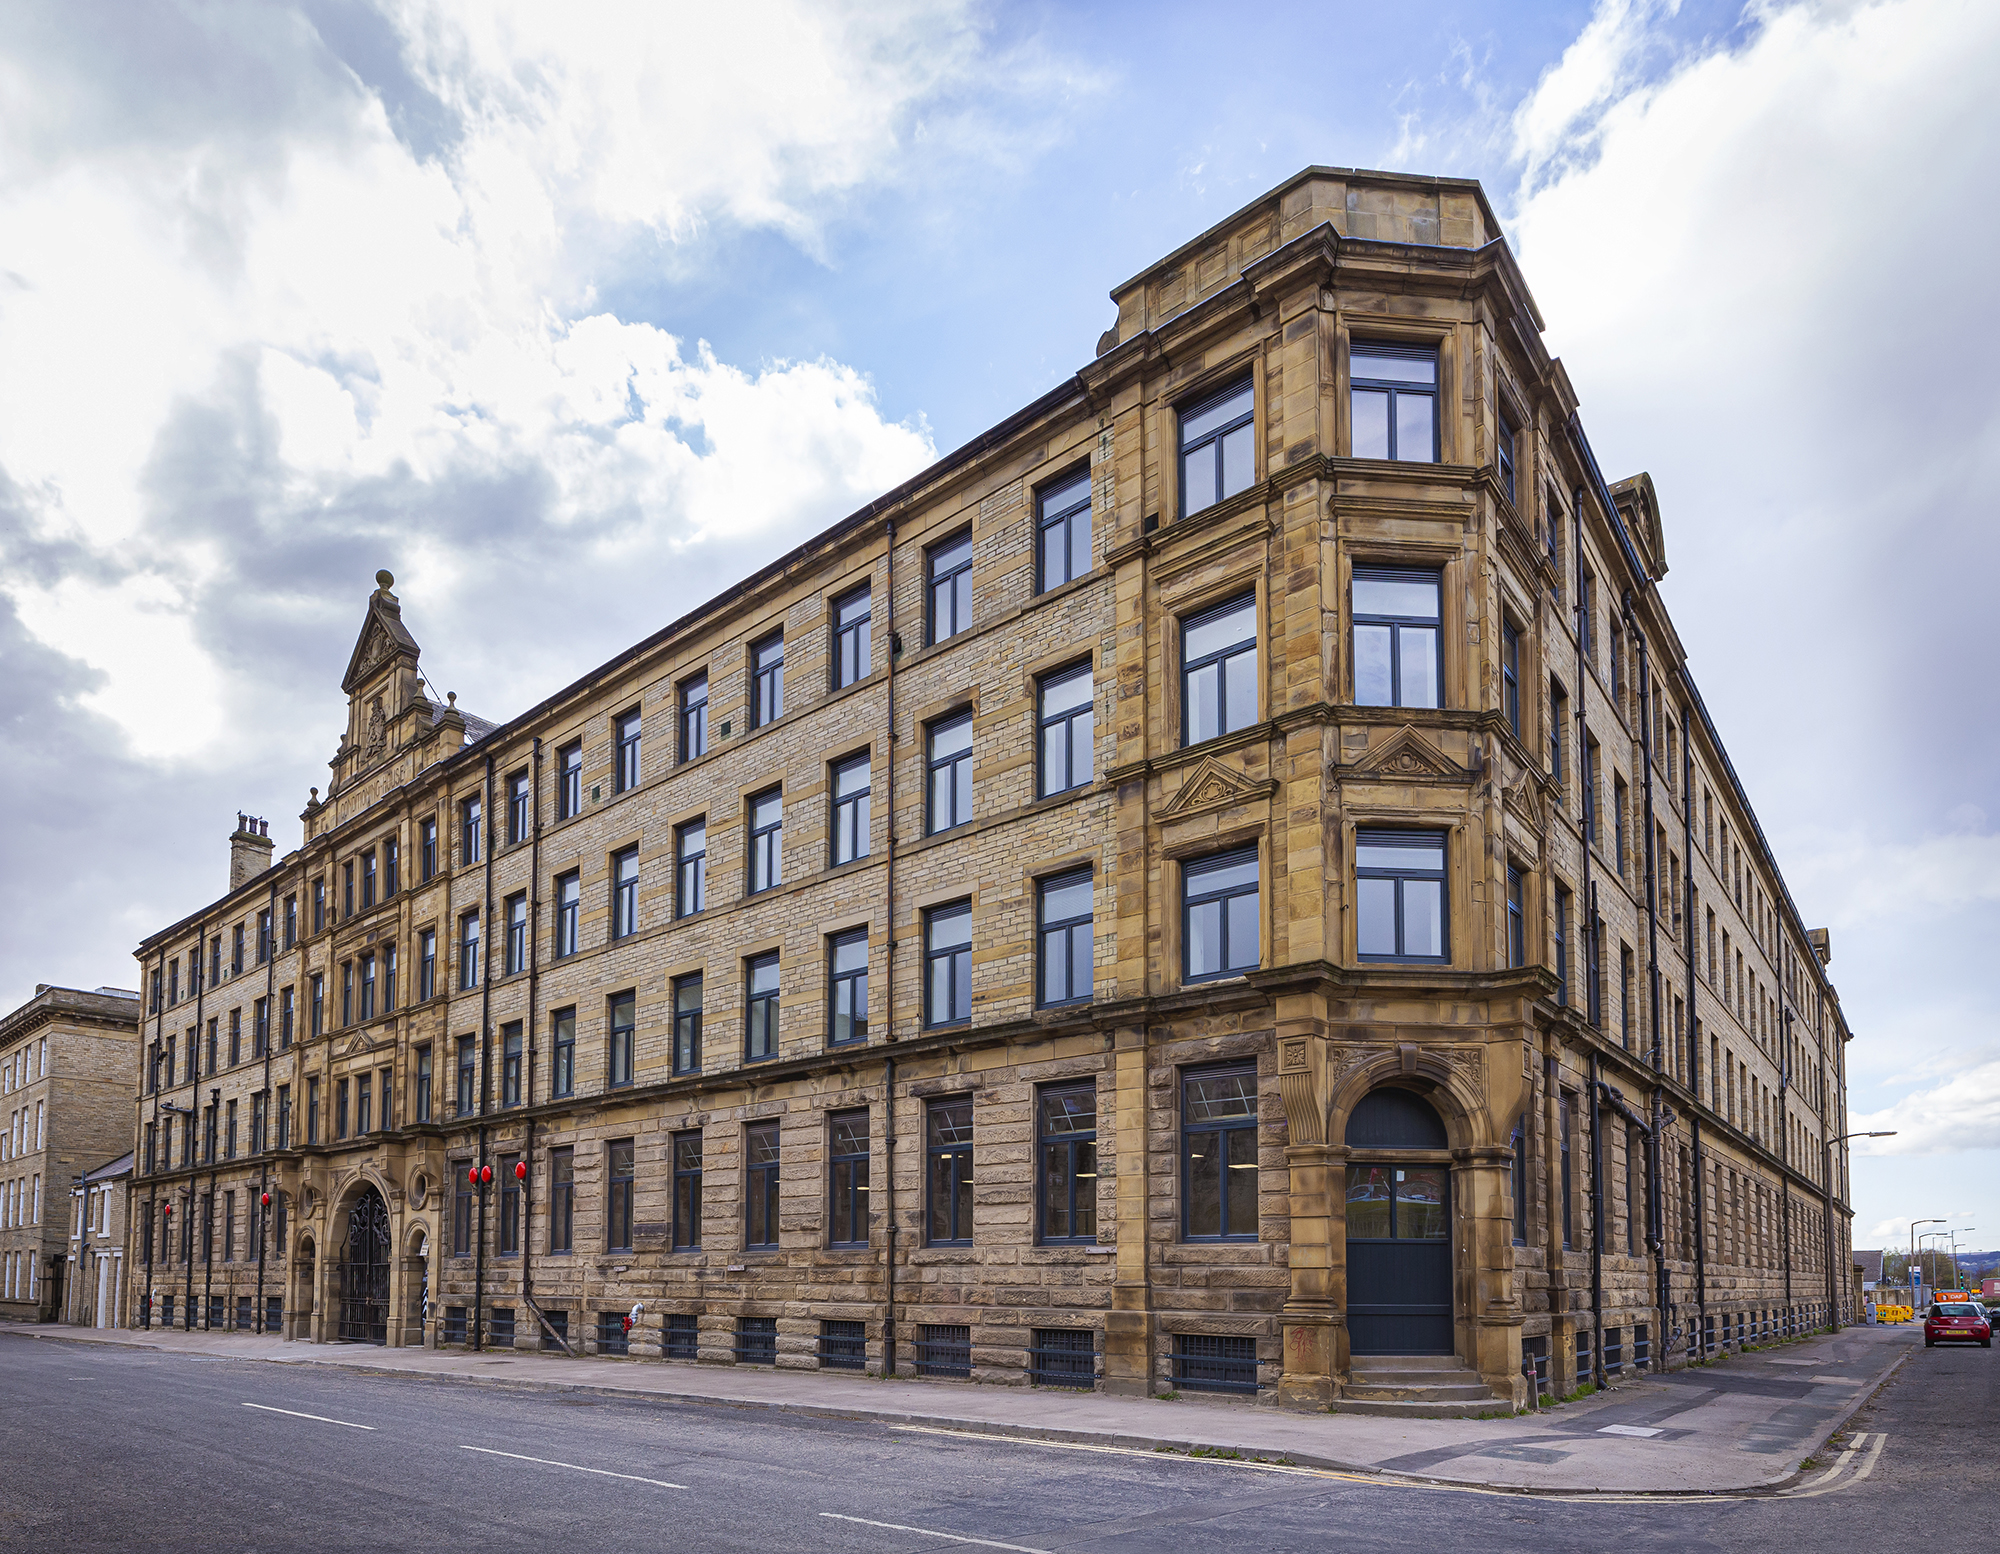 A view of the front of the repaired Conditioning House building in Bradford